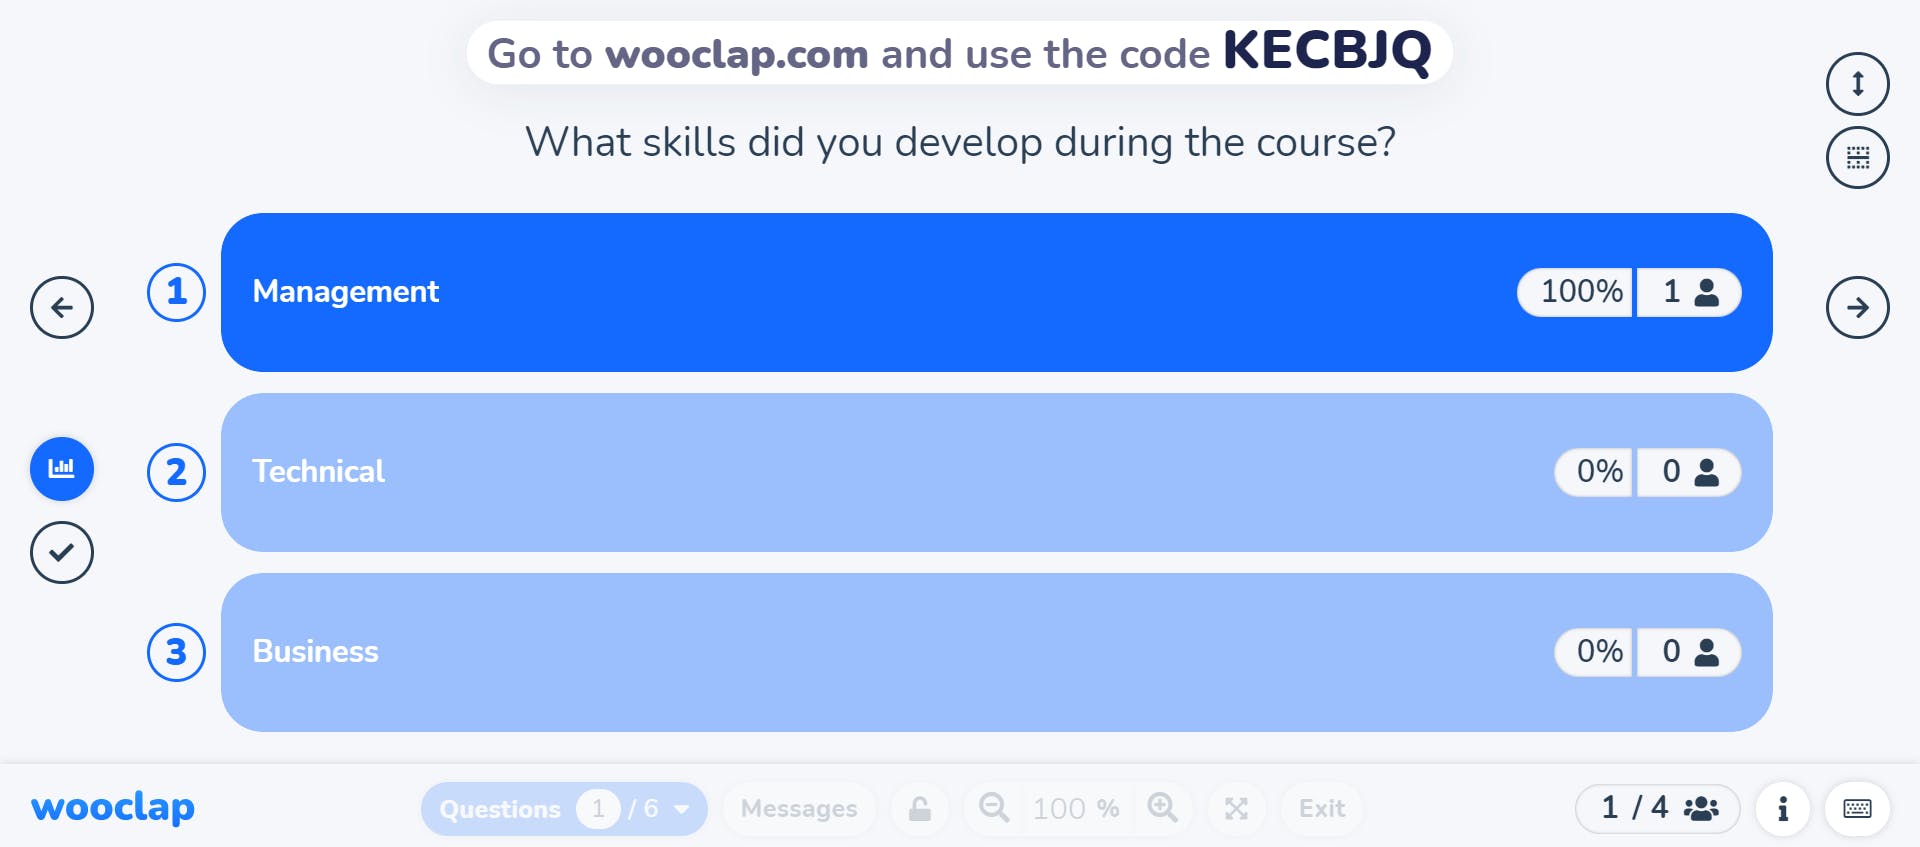 What skills did you develop during the course?
